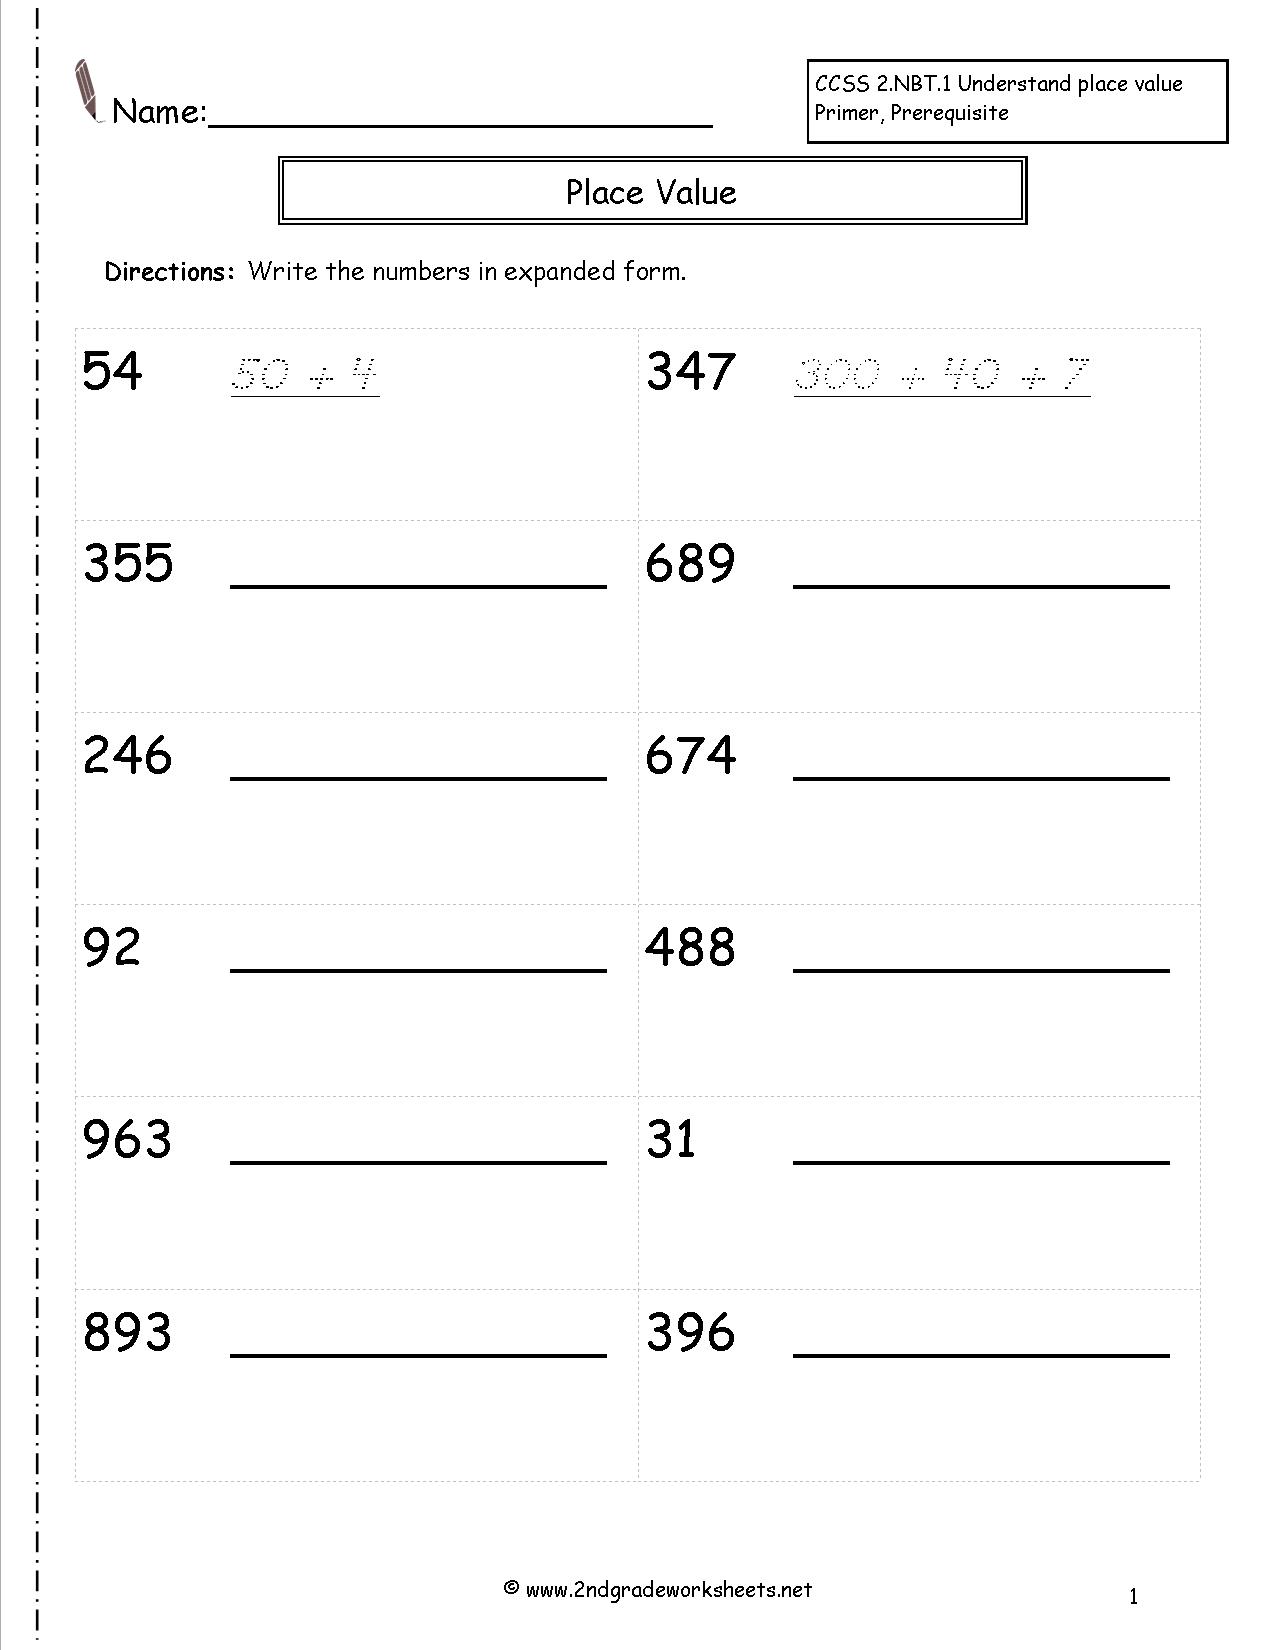 10 Best Images of Hundreds Tens And Ones Worksheets Expanded Form